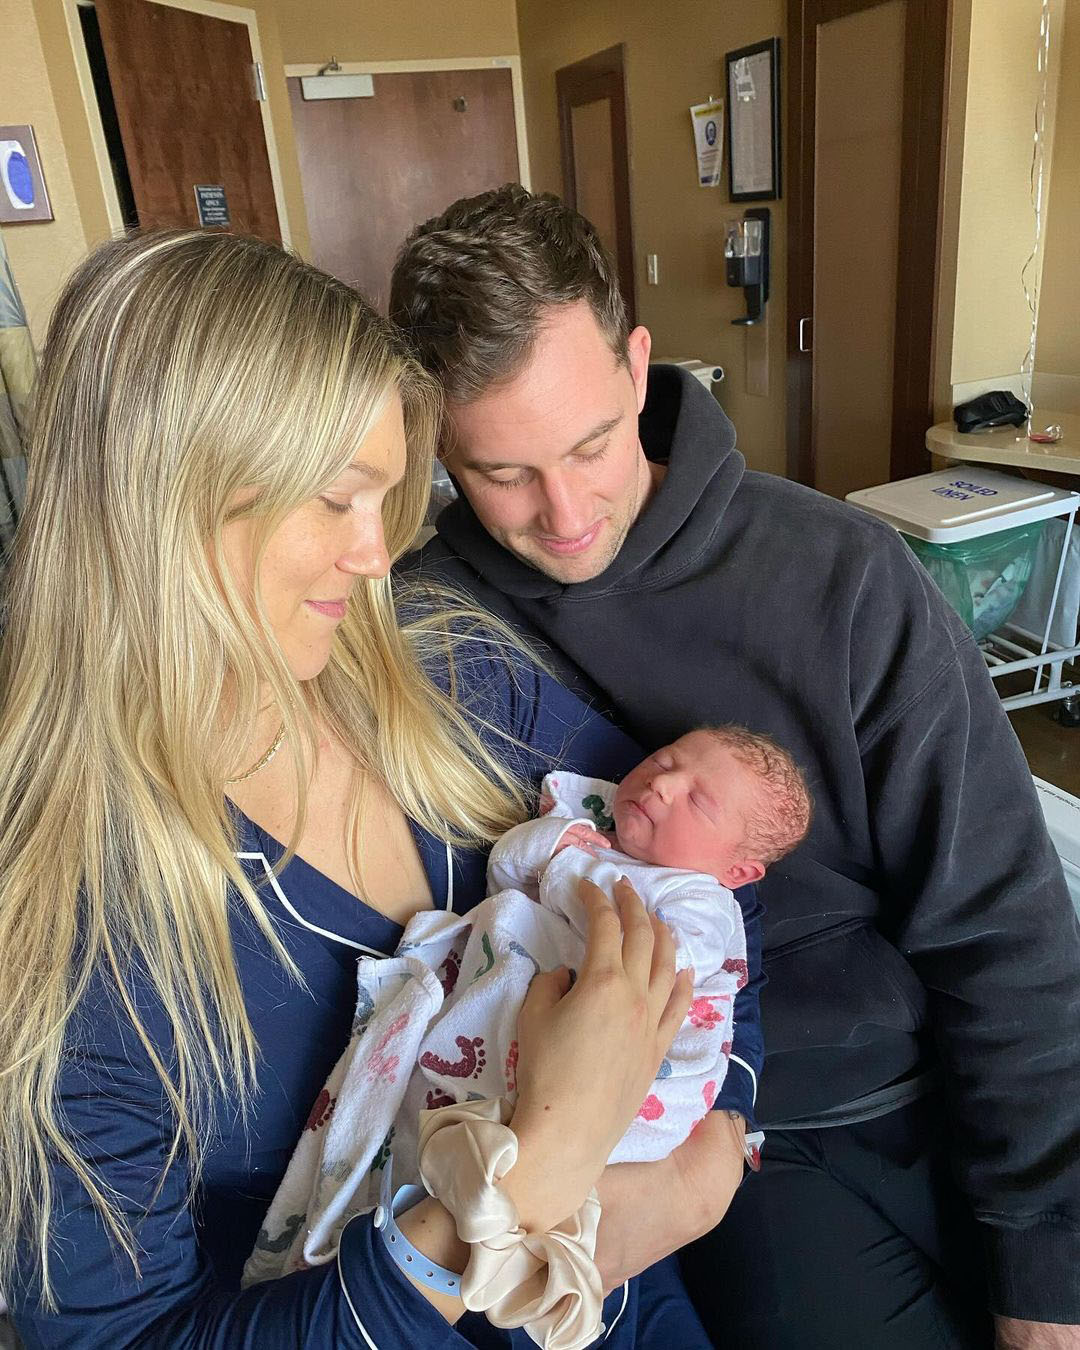 Peloton's Callie Gullickson Welcomes Baby Boy With Husband Chris Howell